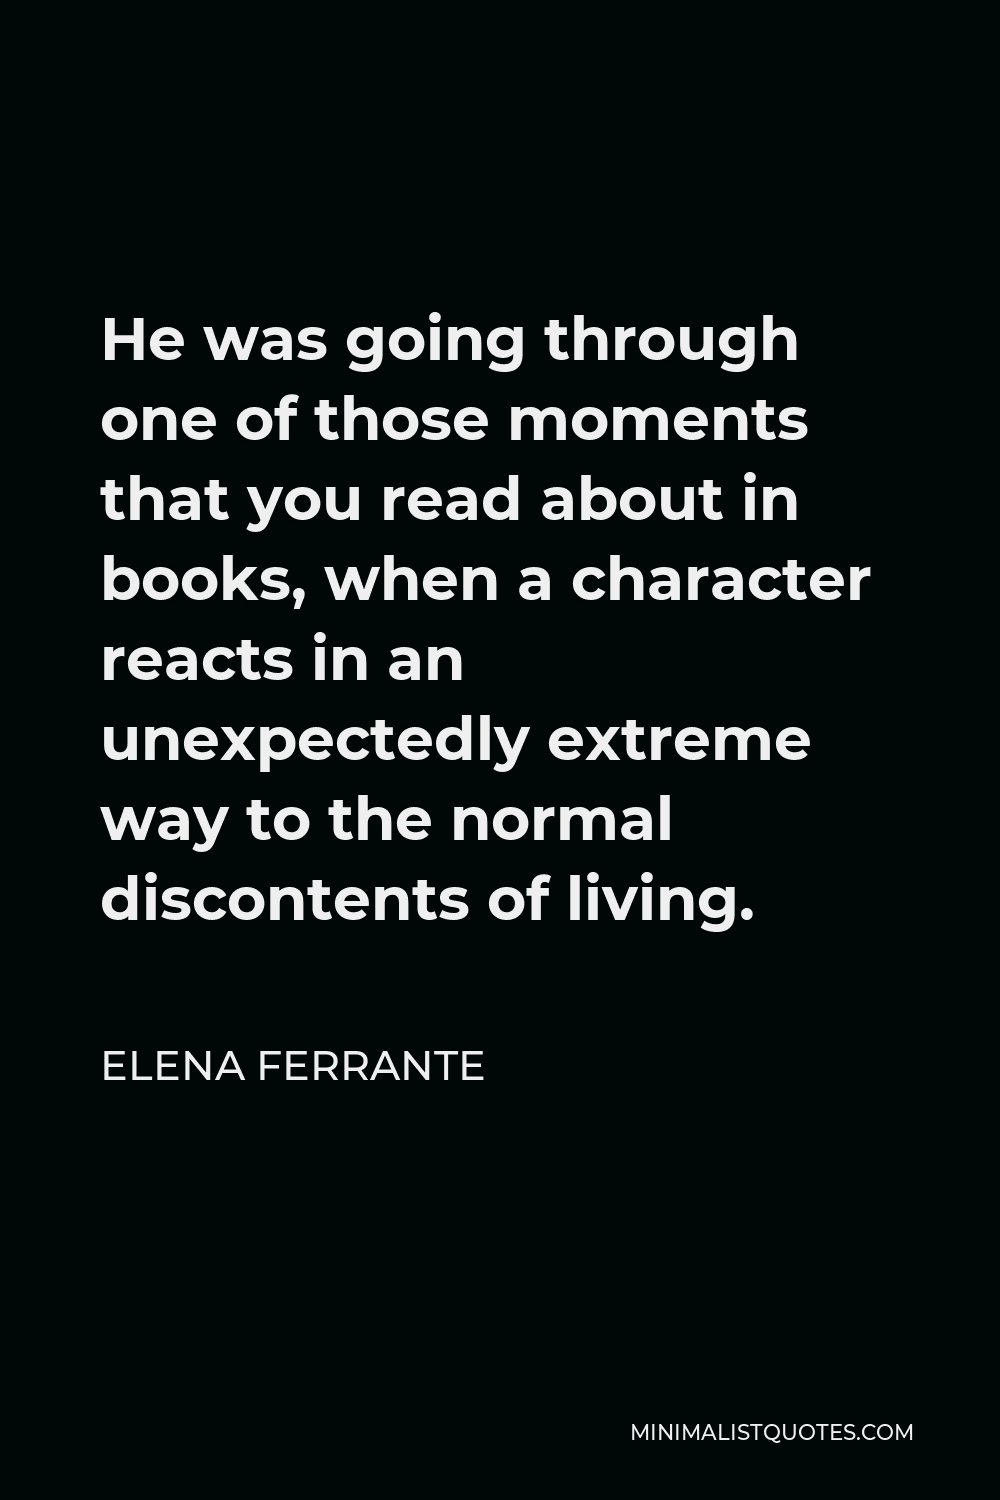 Elena Ferrante Quote - He was going through one of those moments that you read about in books, when a character reacts in an unexpectedly extreme way to the normal discontents of living.